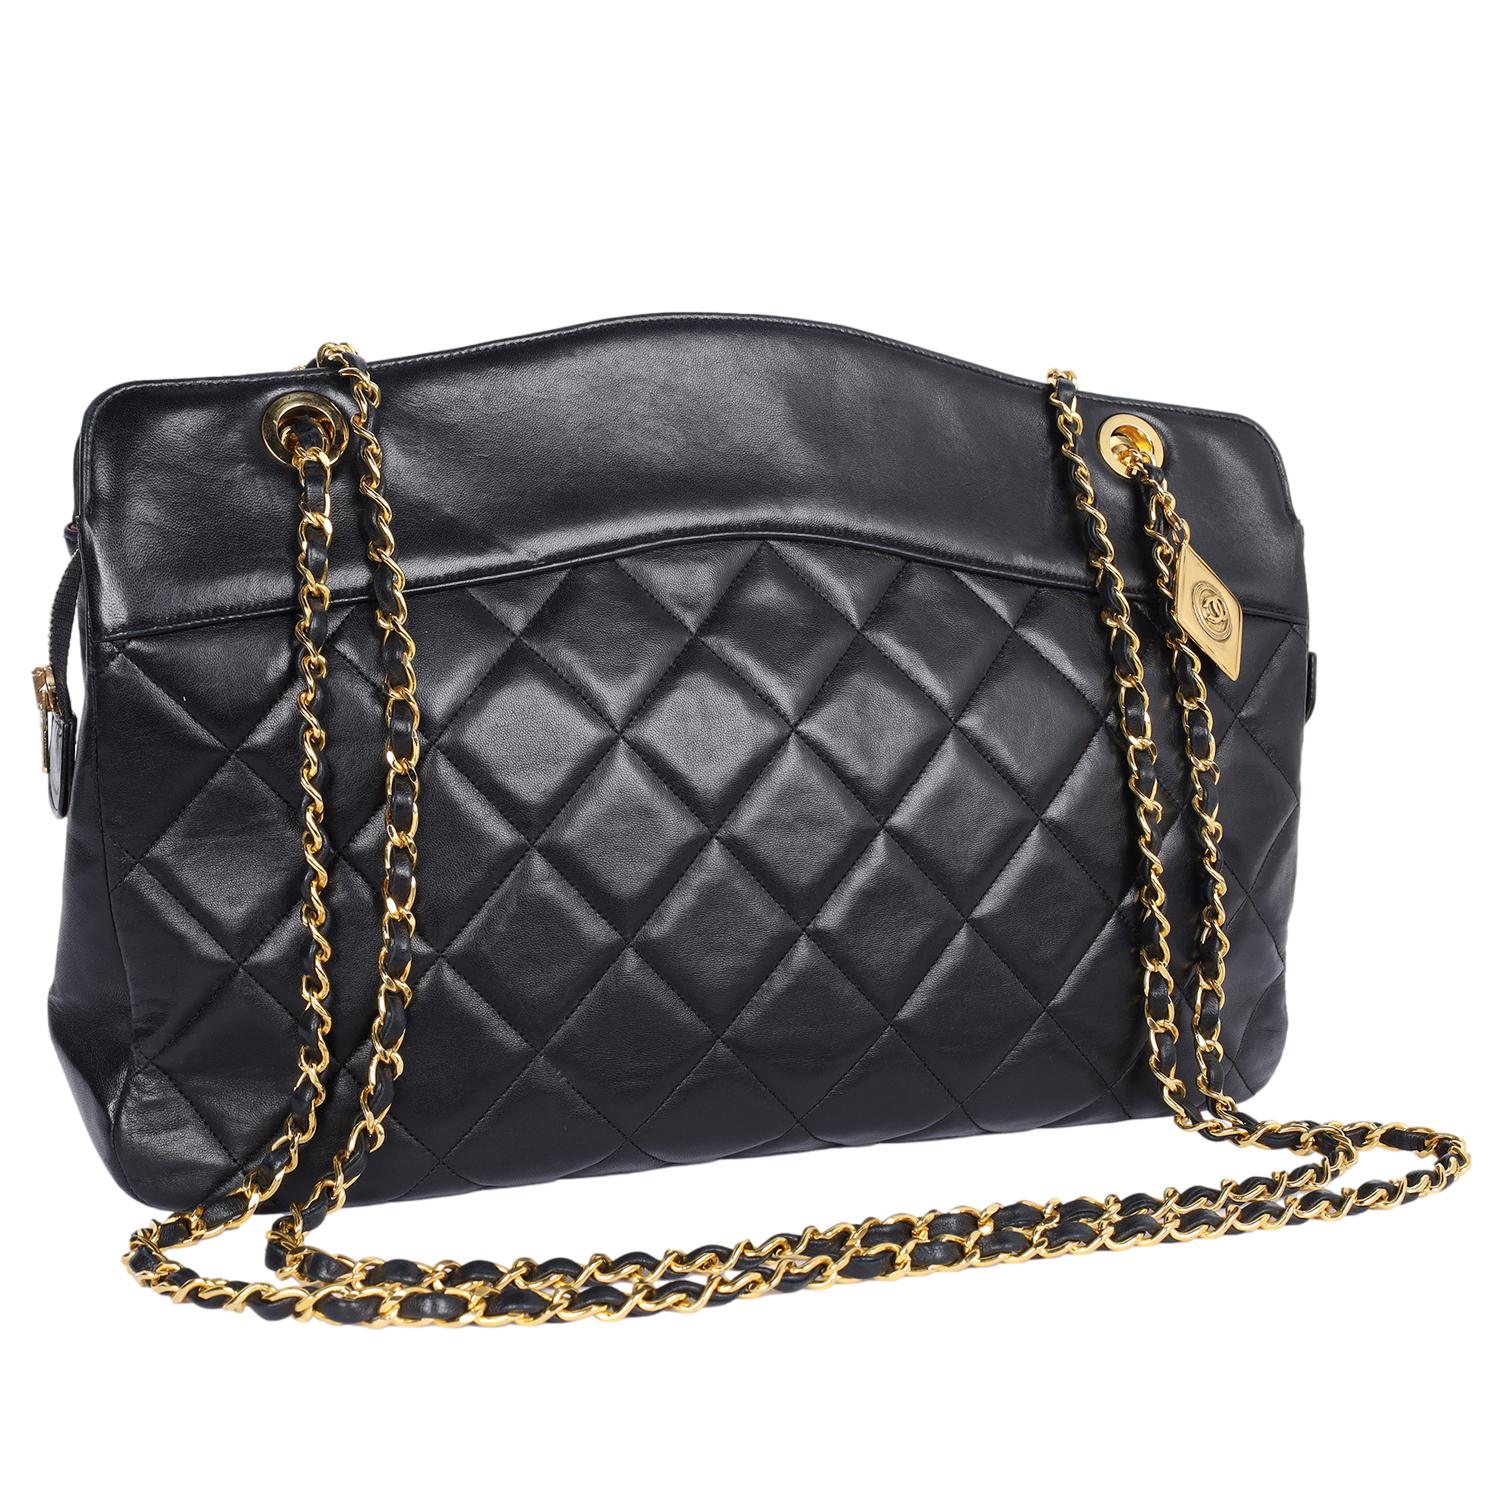 Women's Chanel Black Quilted Lambskin Leather Crossbody Bag 1989 For Sale